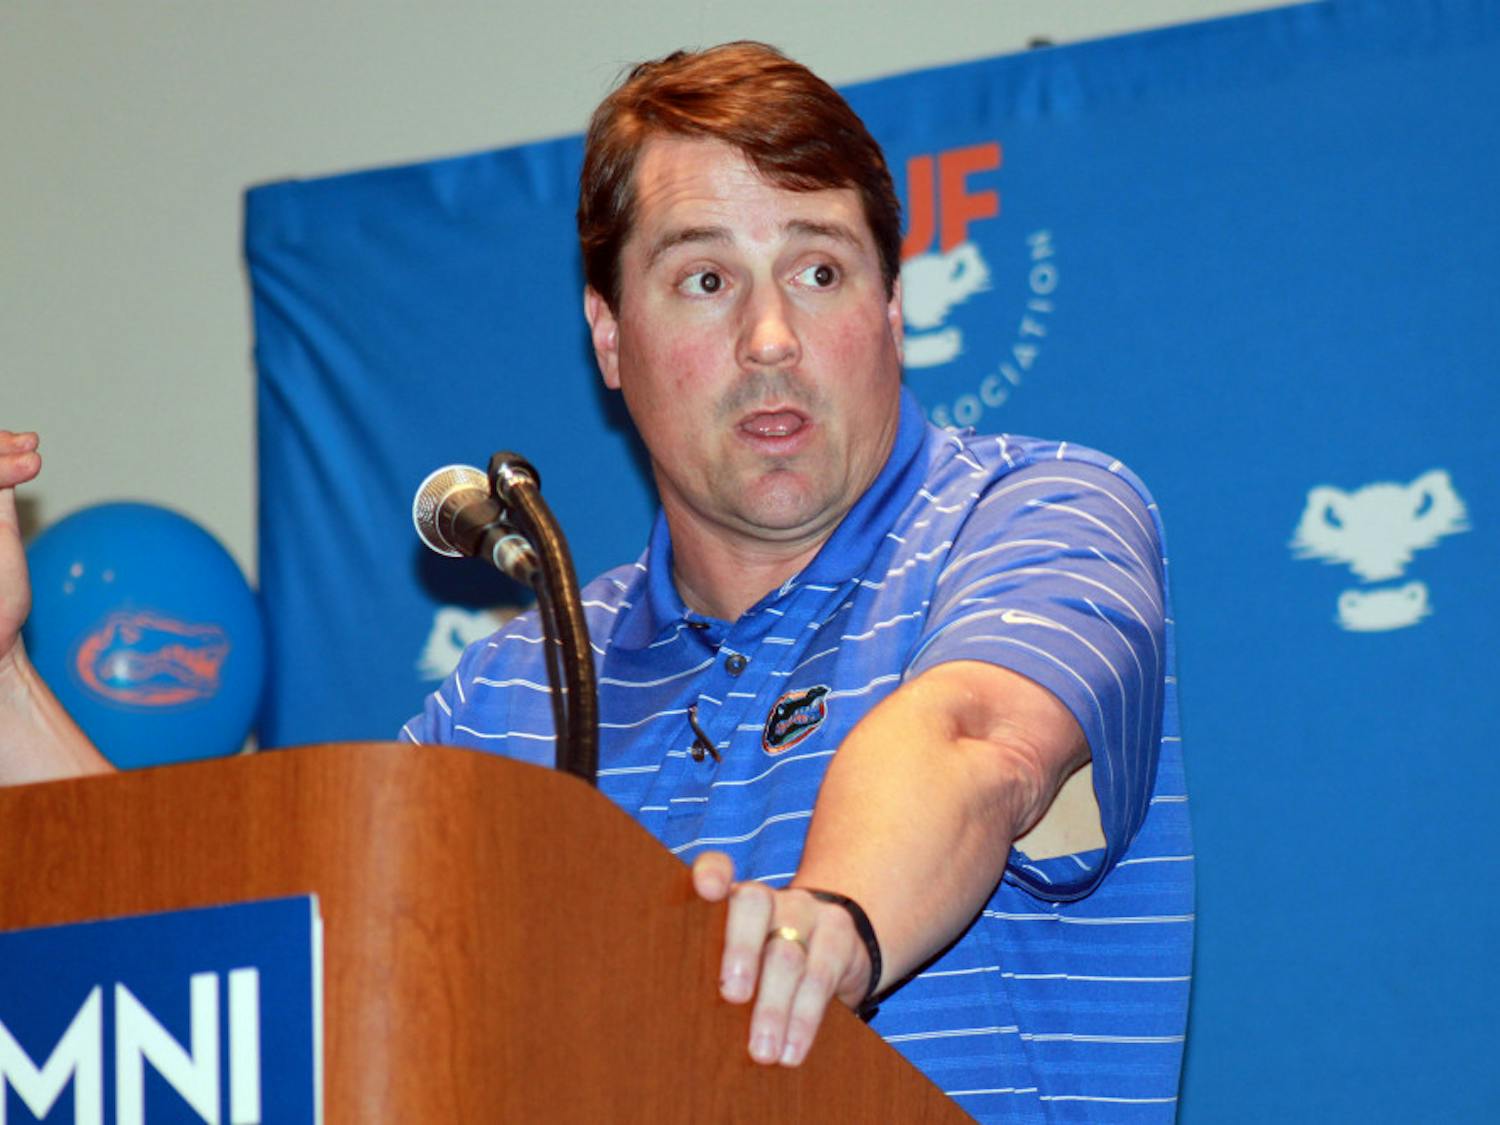 Will Muschamp speaks on Tuesday at Emerson Alumni Hall as a part of his 2014 Gator Gathering tour.